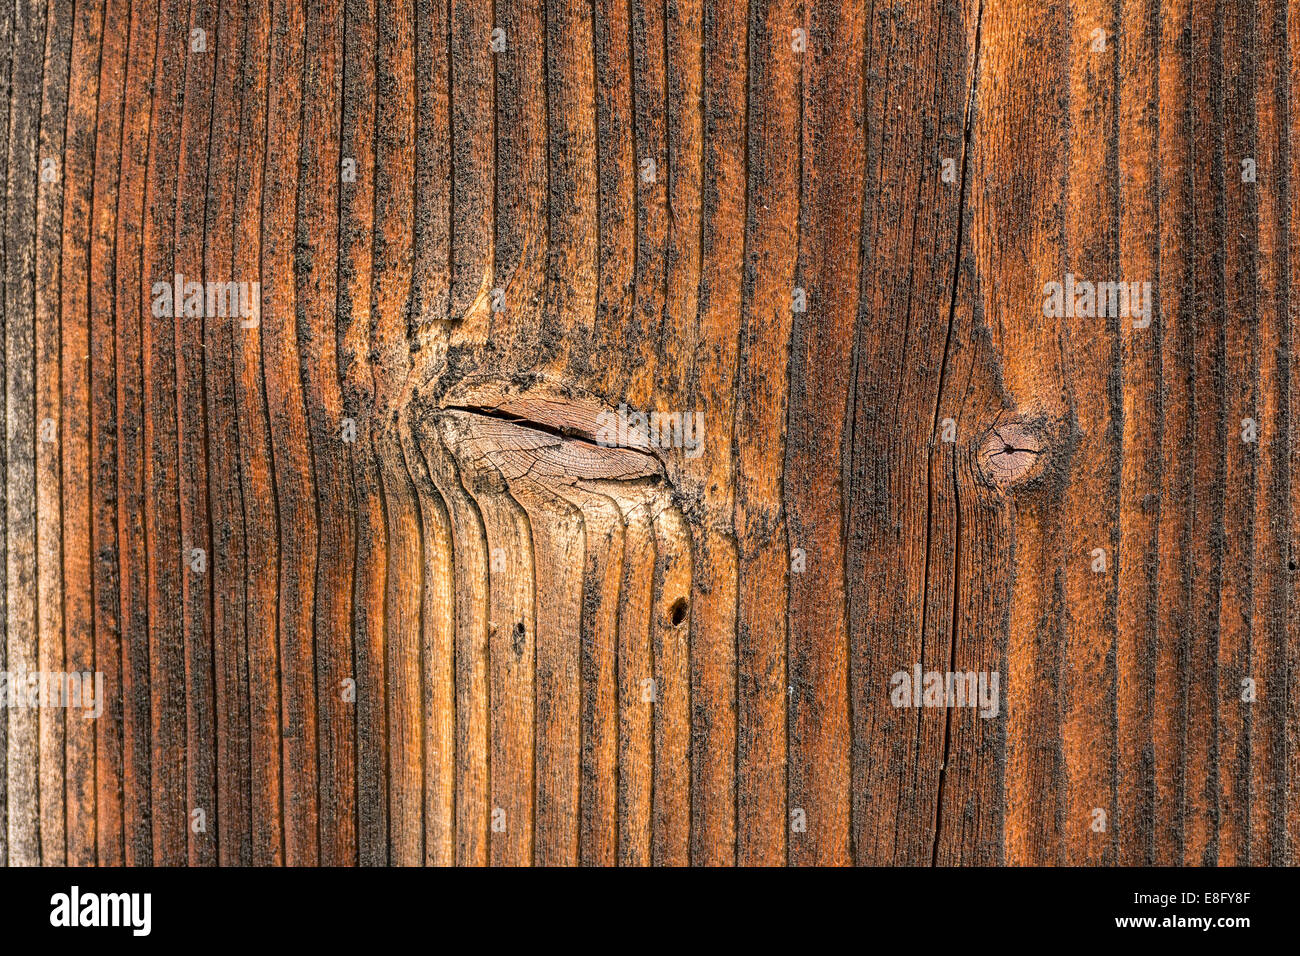 Pine Wood Board Fence Texture Close Up Stock Photo